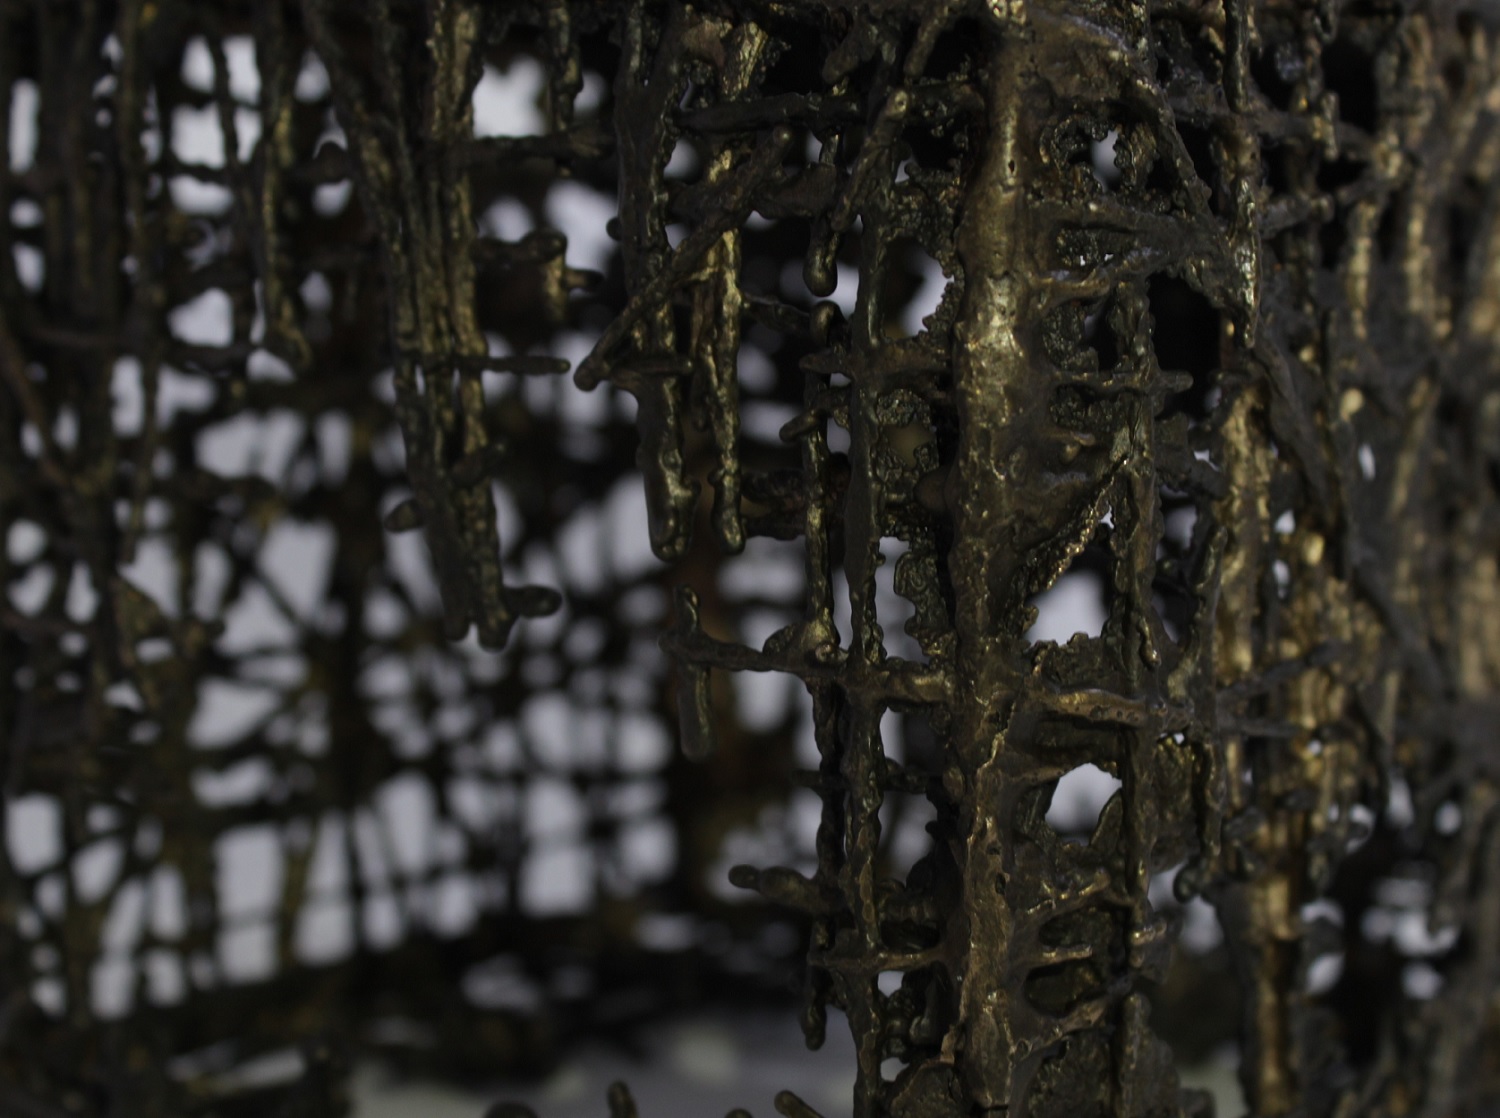 Sculpture by Jo Bellamy. Image of a detail of a larger work. Images shows a close up of a random mesh made of bronze. The whole piece (not visible) is a mesh cube, each side is 12.5cm. The casting process has failed to fully form the mesh which has gaps and there are holes in the structure